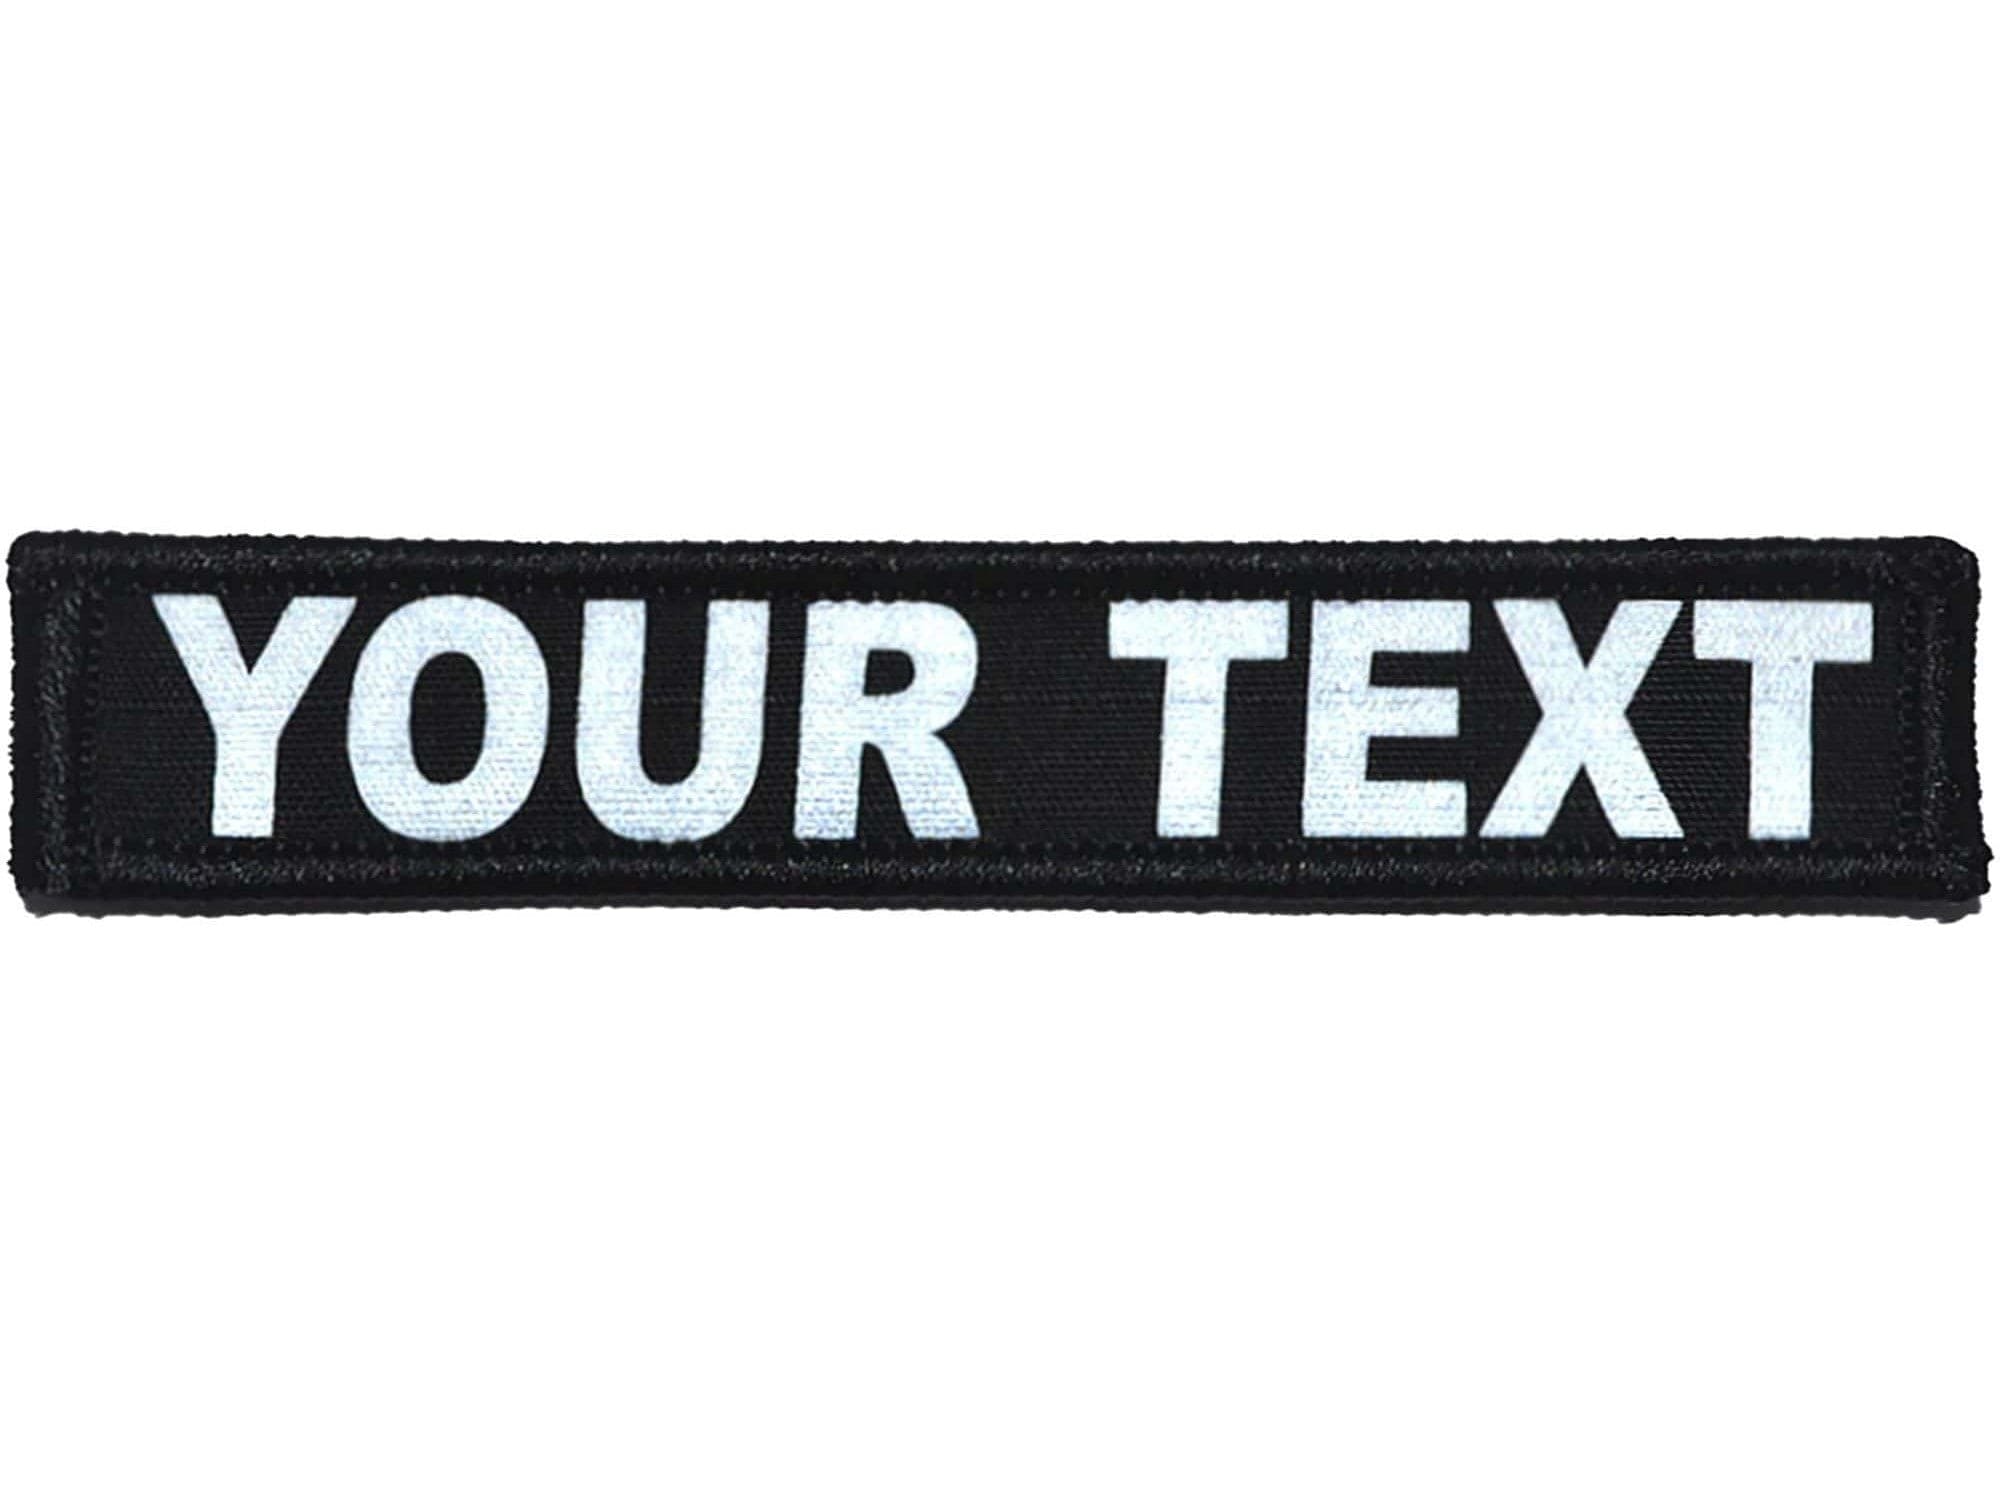 Personalized Custom Patch/patches Label Tag 3M REFLECTIVE Letters